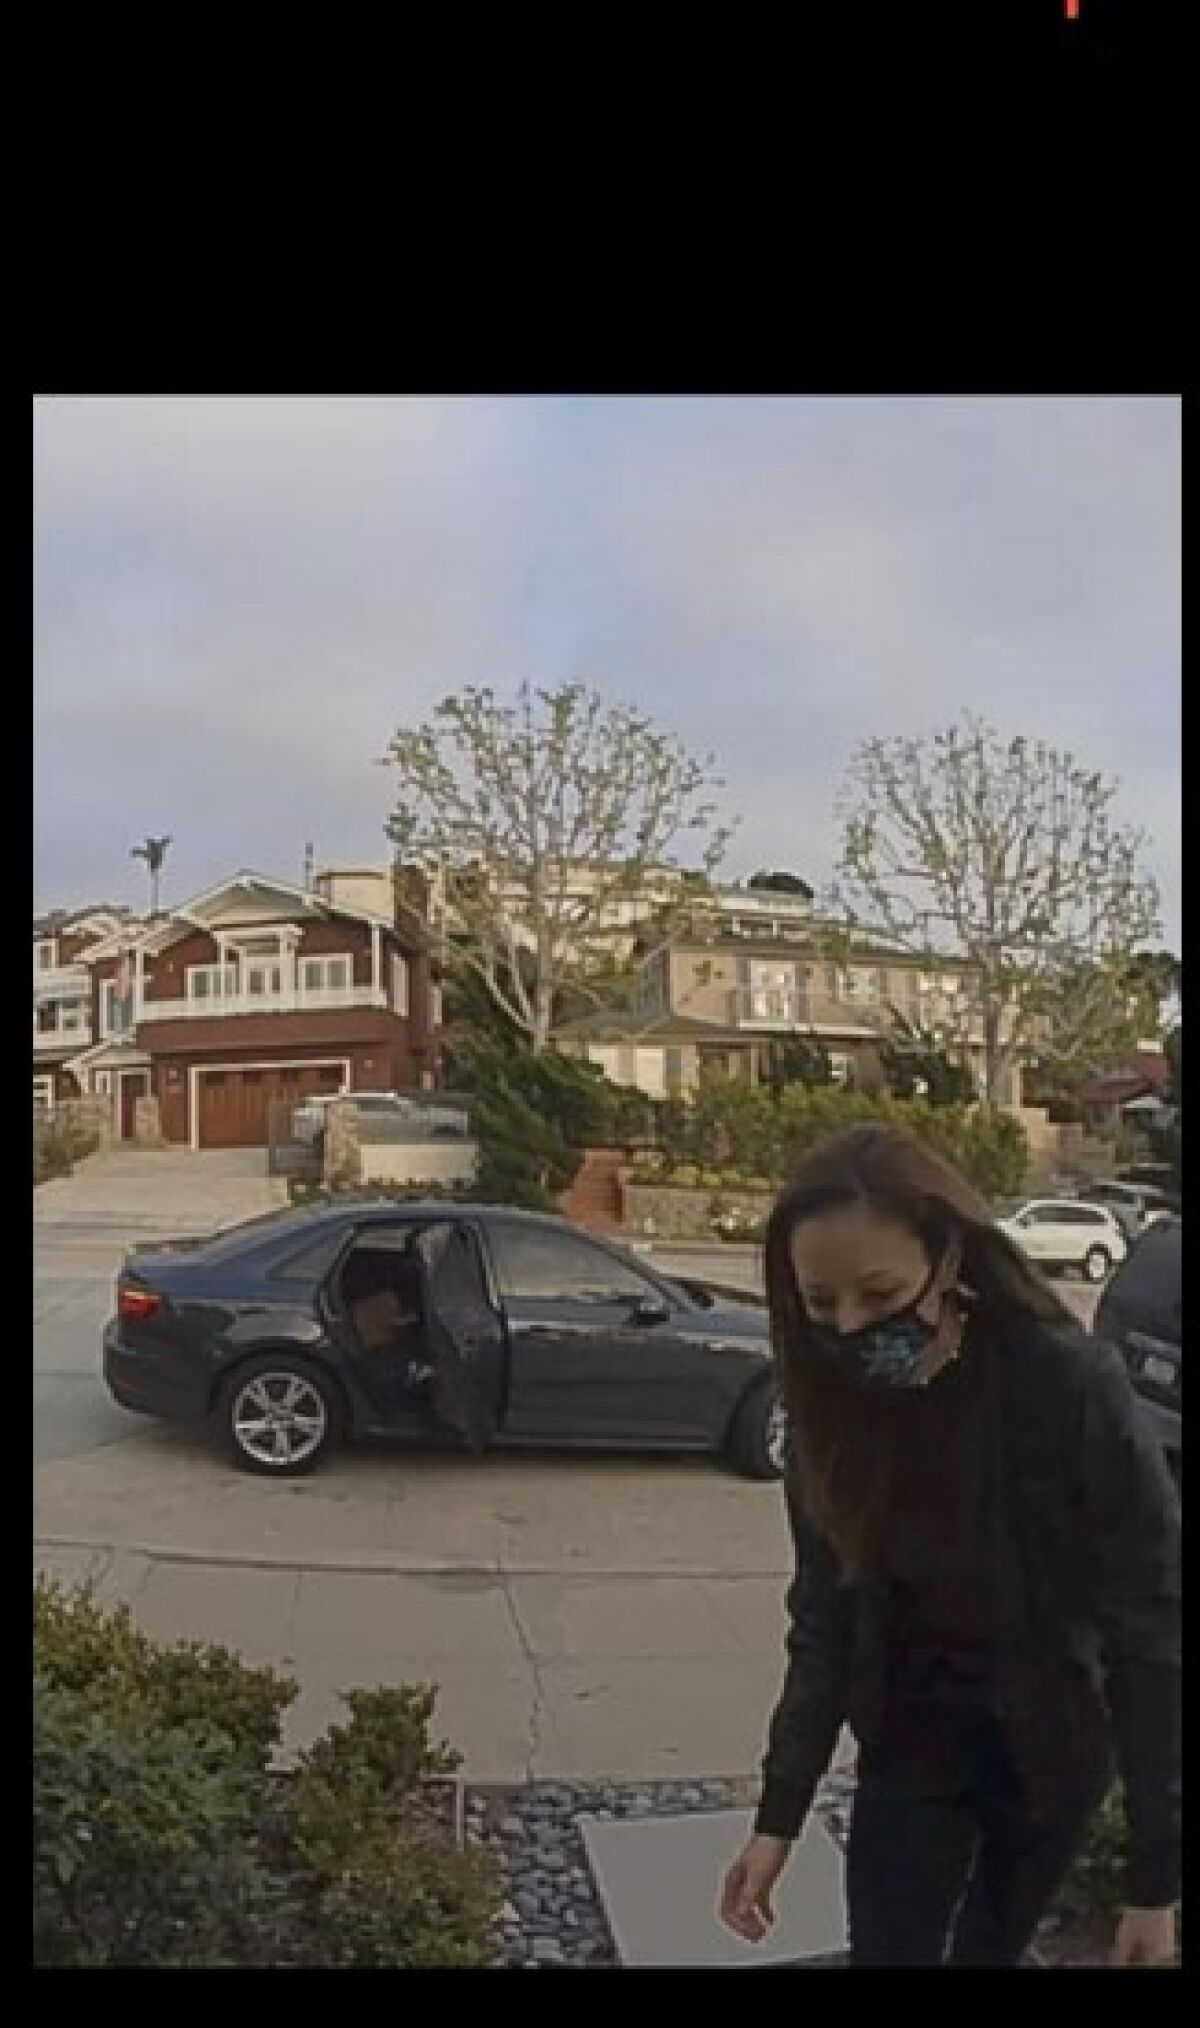 Home security footage shows a woman suspected of stealing packages from La Jolla porches and loading them in a waiting car.